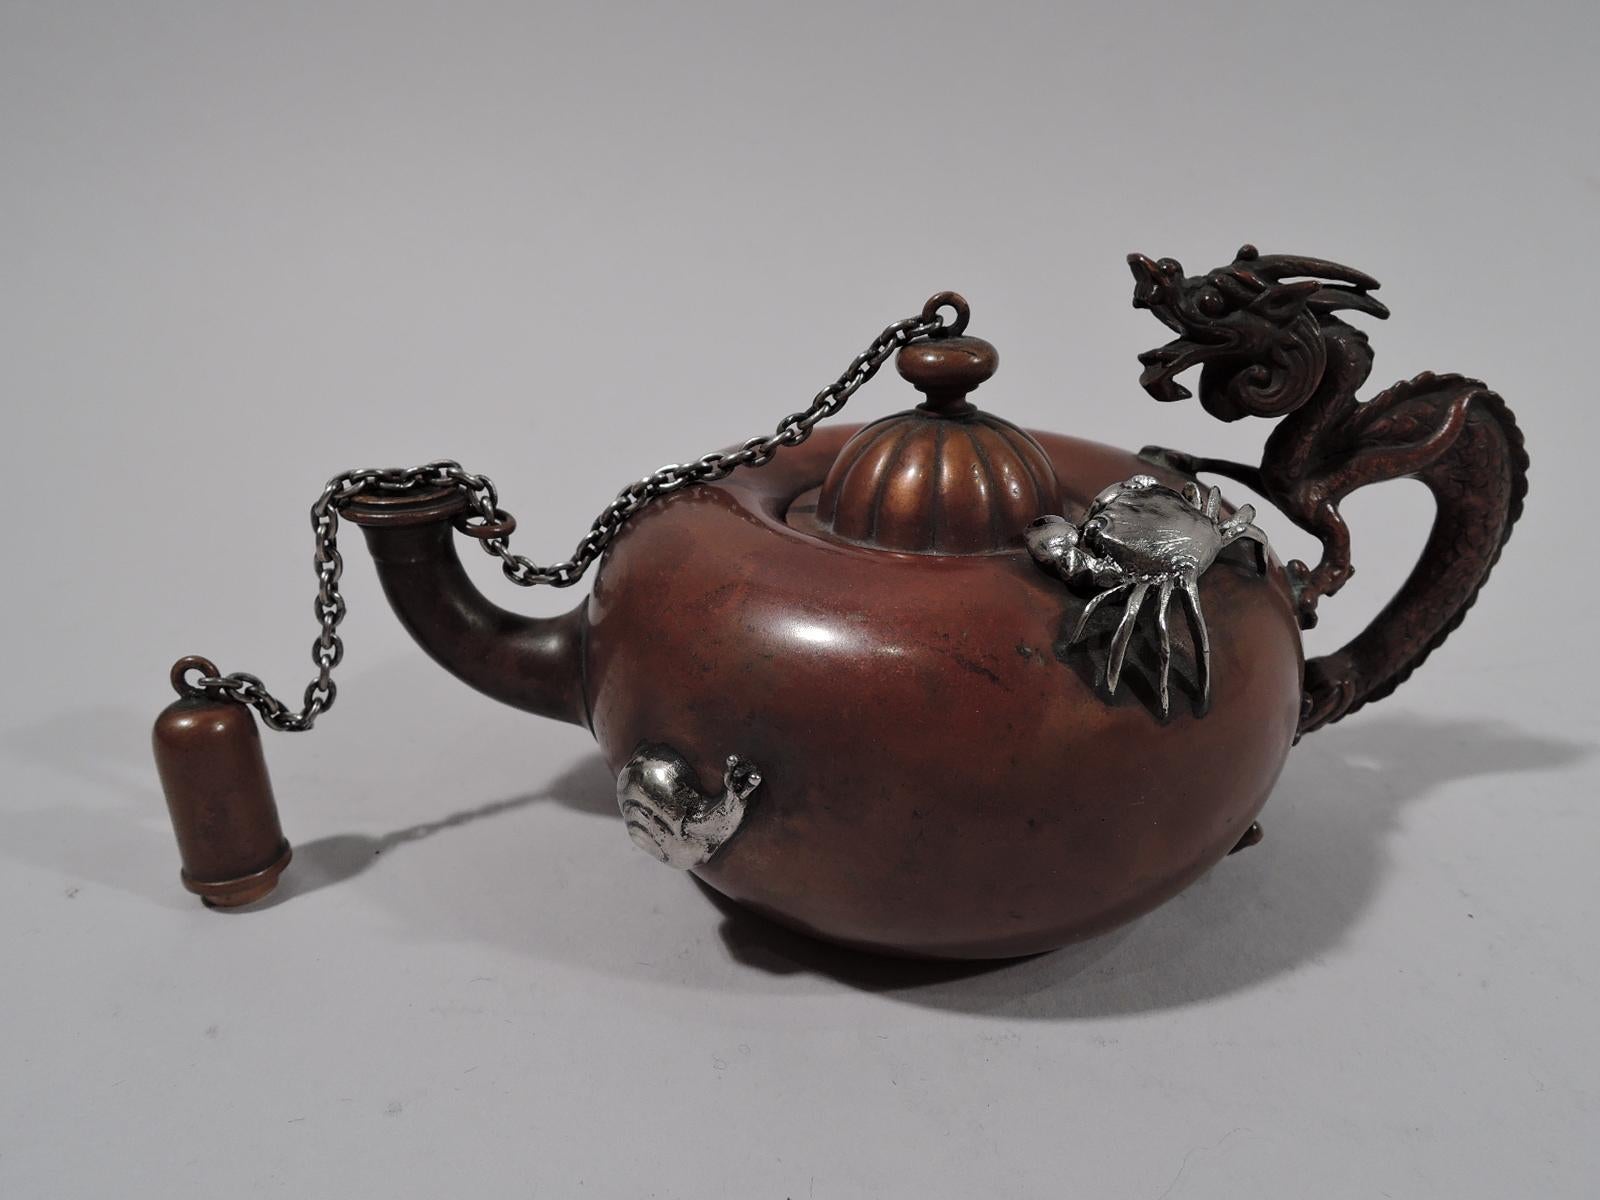 Japonesque mixed metal cigar lighter. Made by Gorham in Providence in 1903. Copper teapot-form with bellied body and cast handle in form of dragon, horned head and talons gripping sides. Upturned spout with chained cap. Also chained is domed and